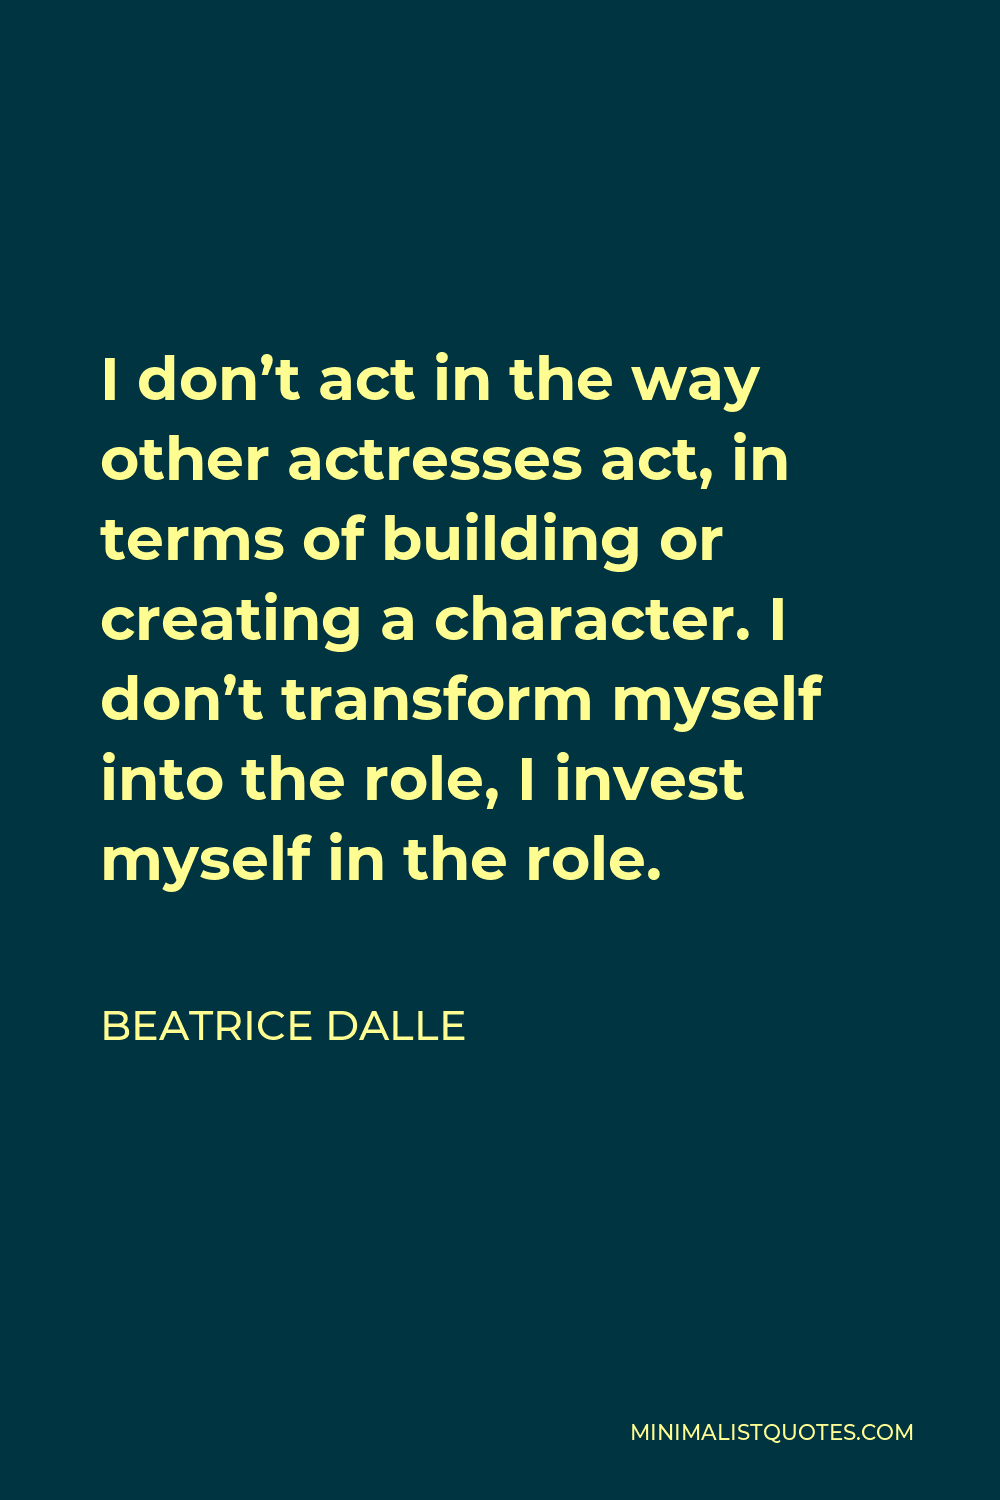 Beatrice Dalle Quote - I don’t act in the way other actresses act, in terms of building or creating a character. I don’t transform myself into the role, I invest myself in the role.